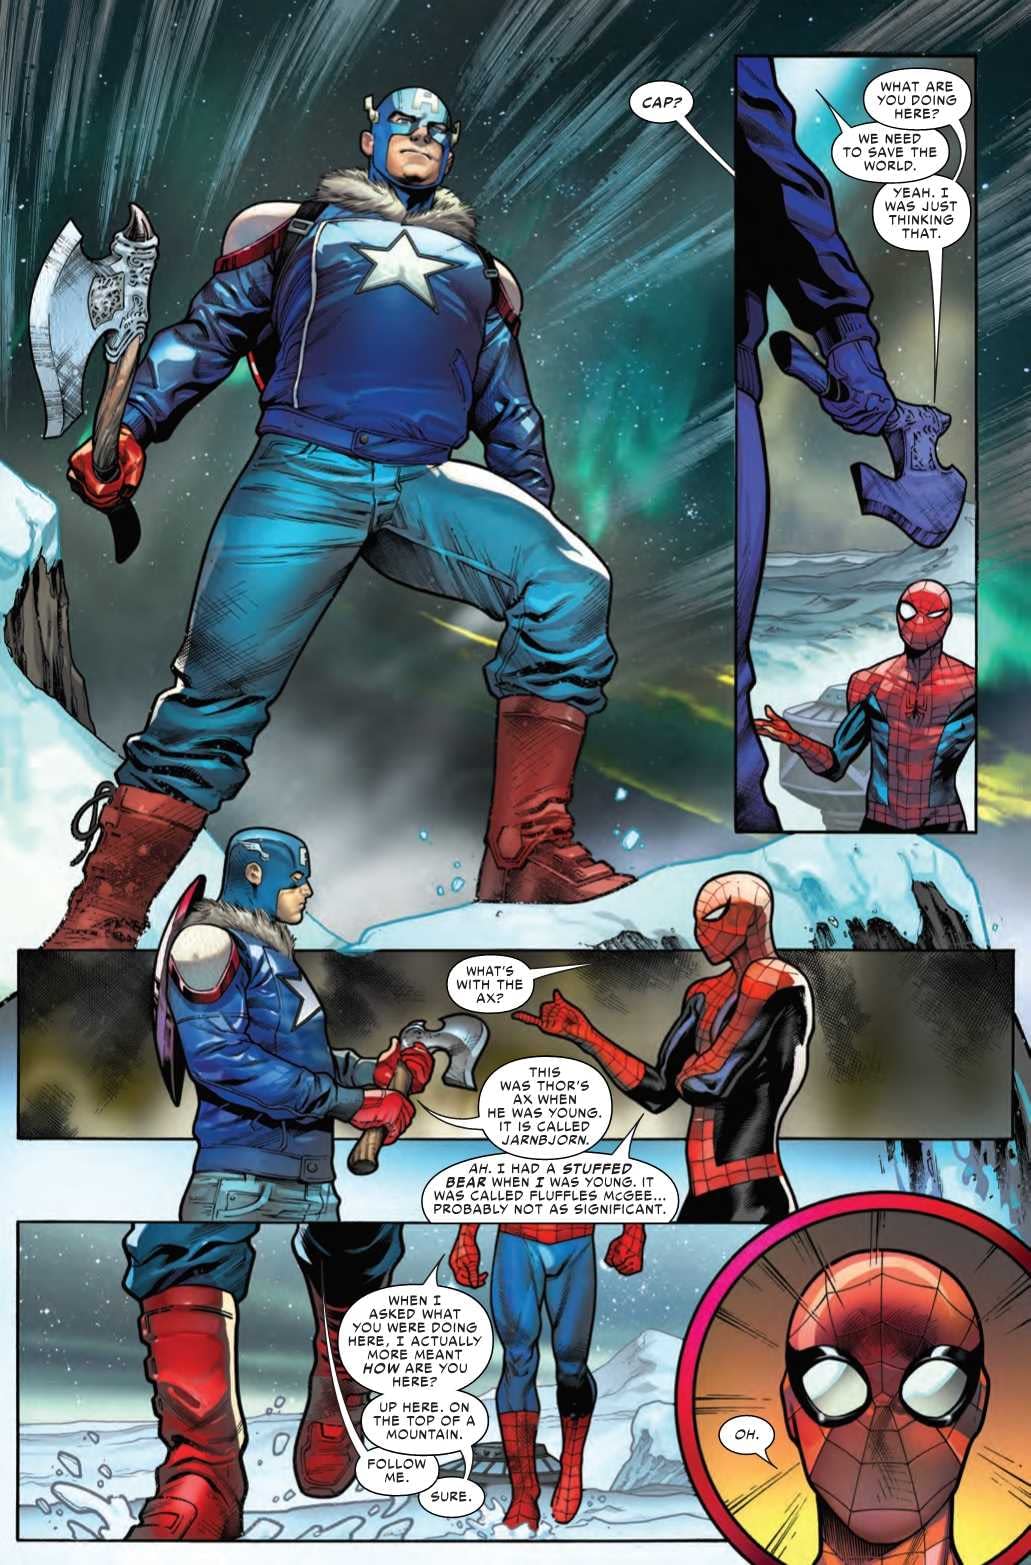 Spider-Man's Wish Fulfillment in War of the Realms: Strikeforce: Land of the Giants #1 (Preview)